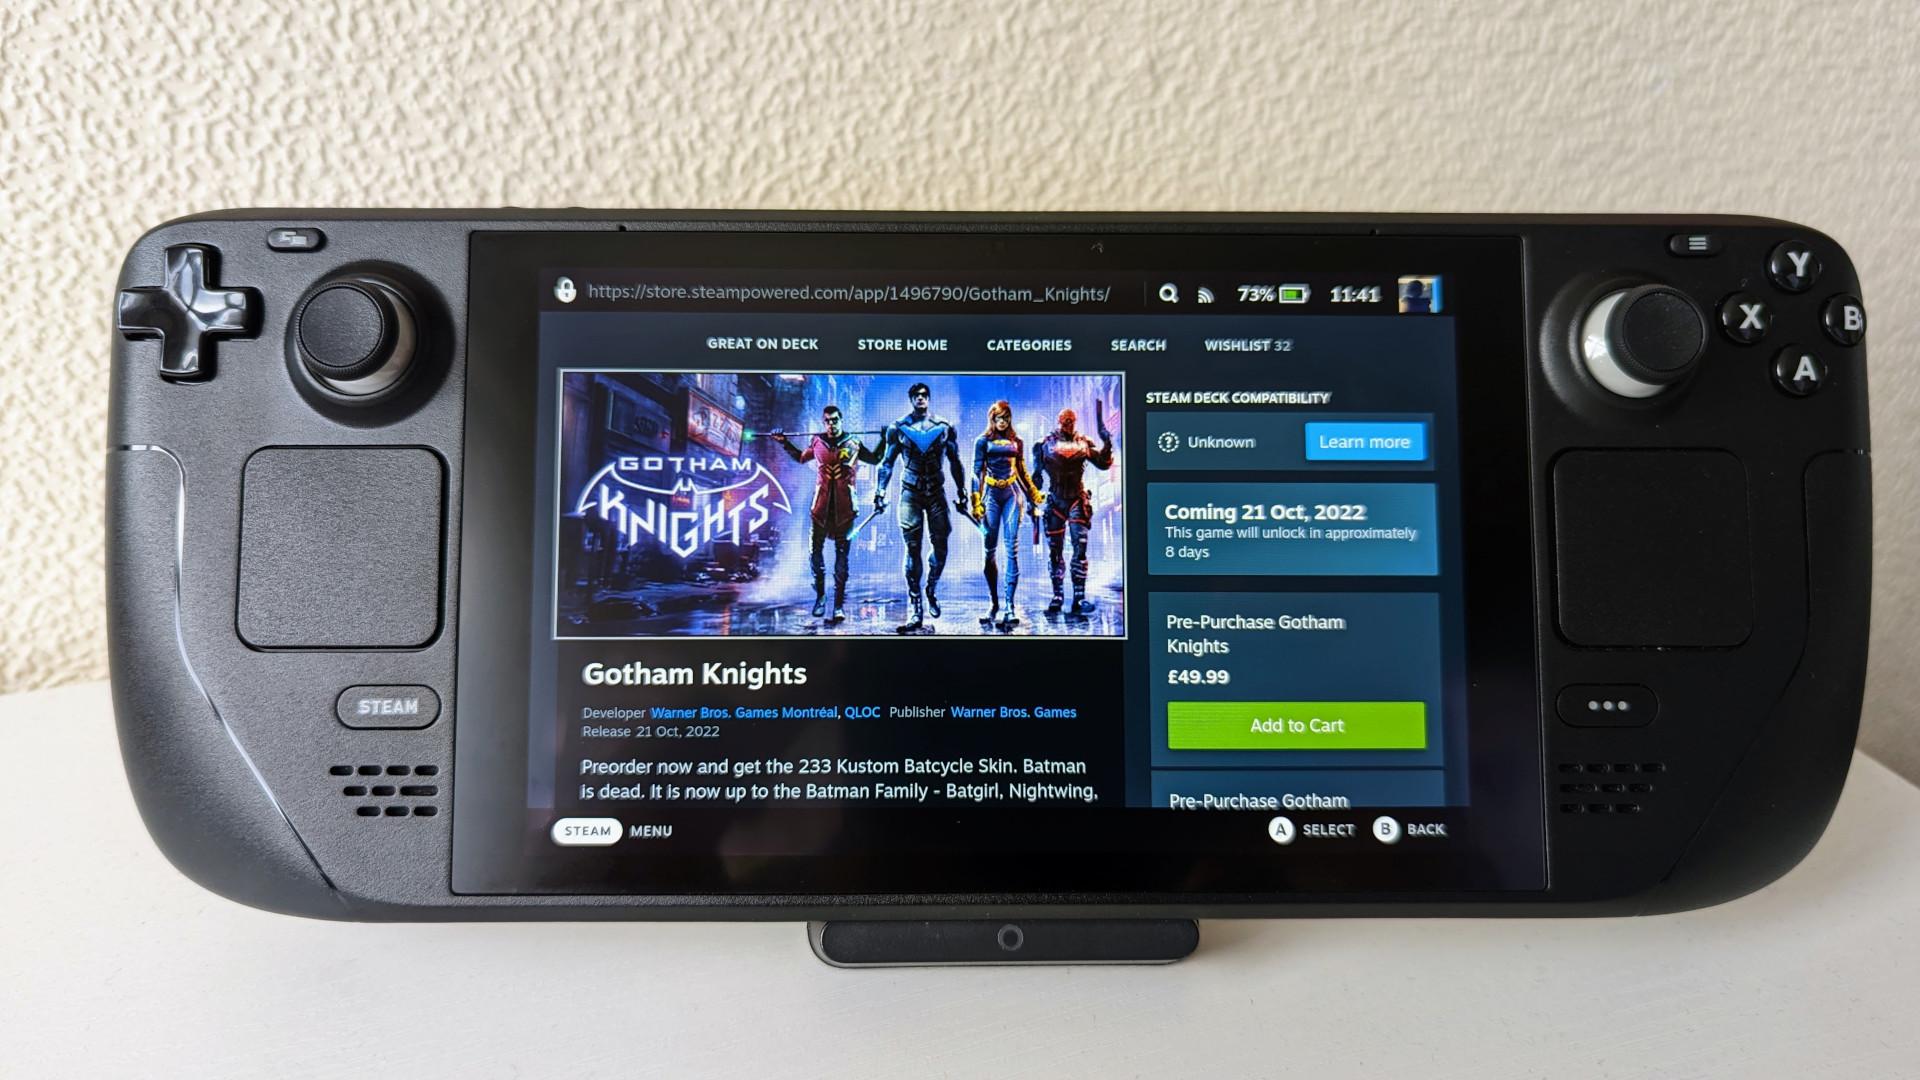 A Steam Deck with the Gotham Knights store page on its display